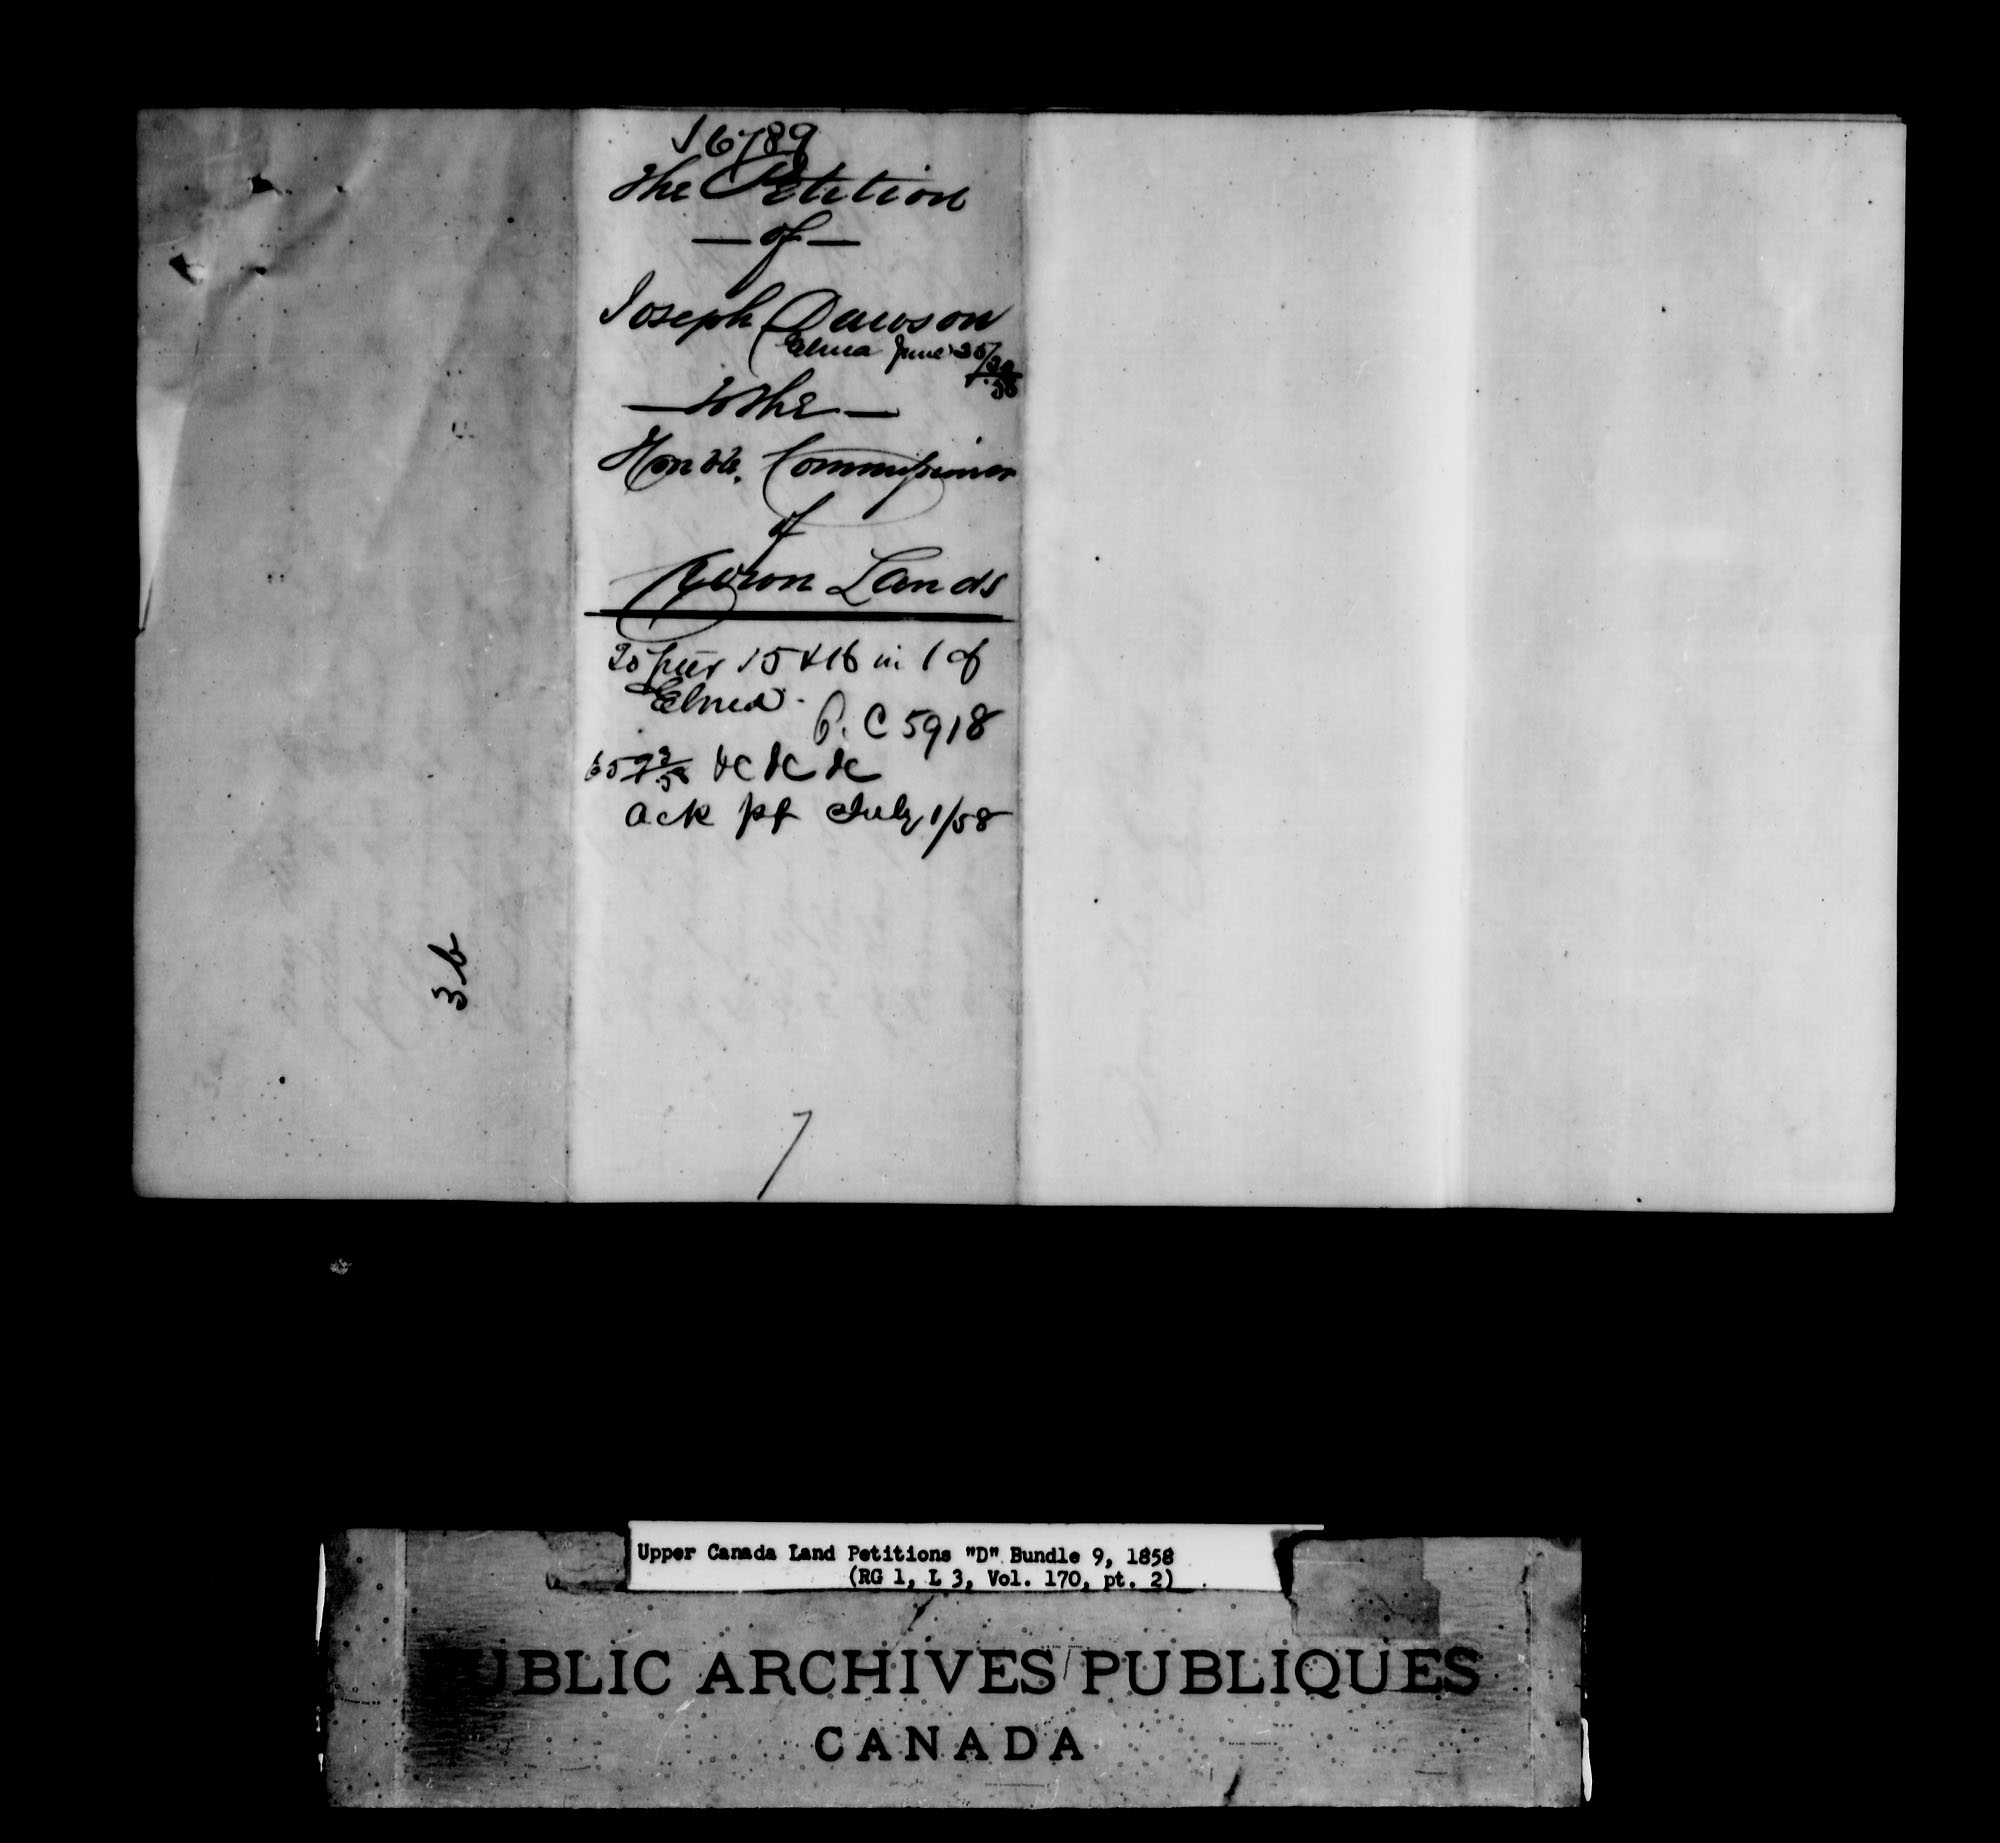 Title: Upper Canada Land Petitions (1763-1865) - Mikan Number: 205131 - Microform: c-1884